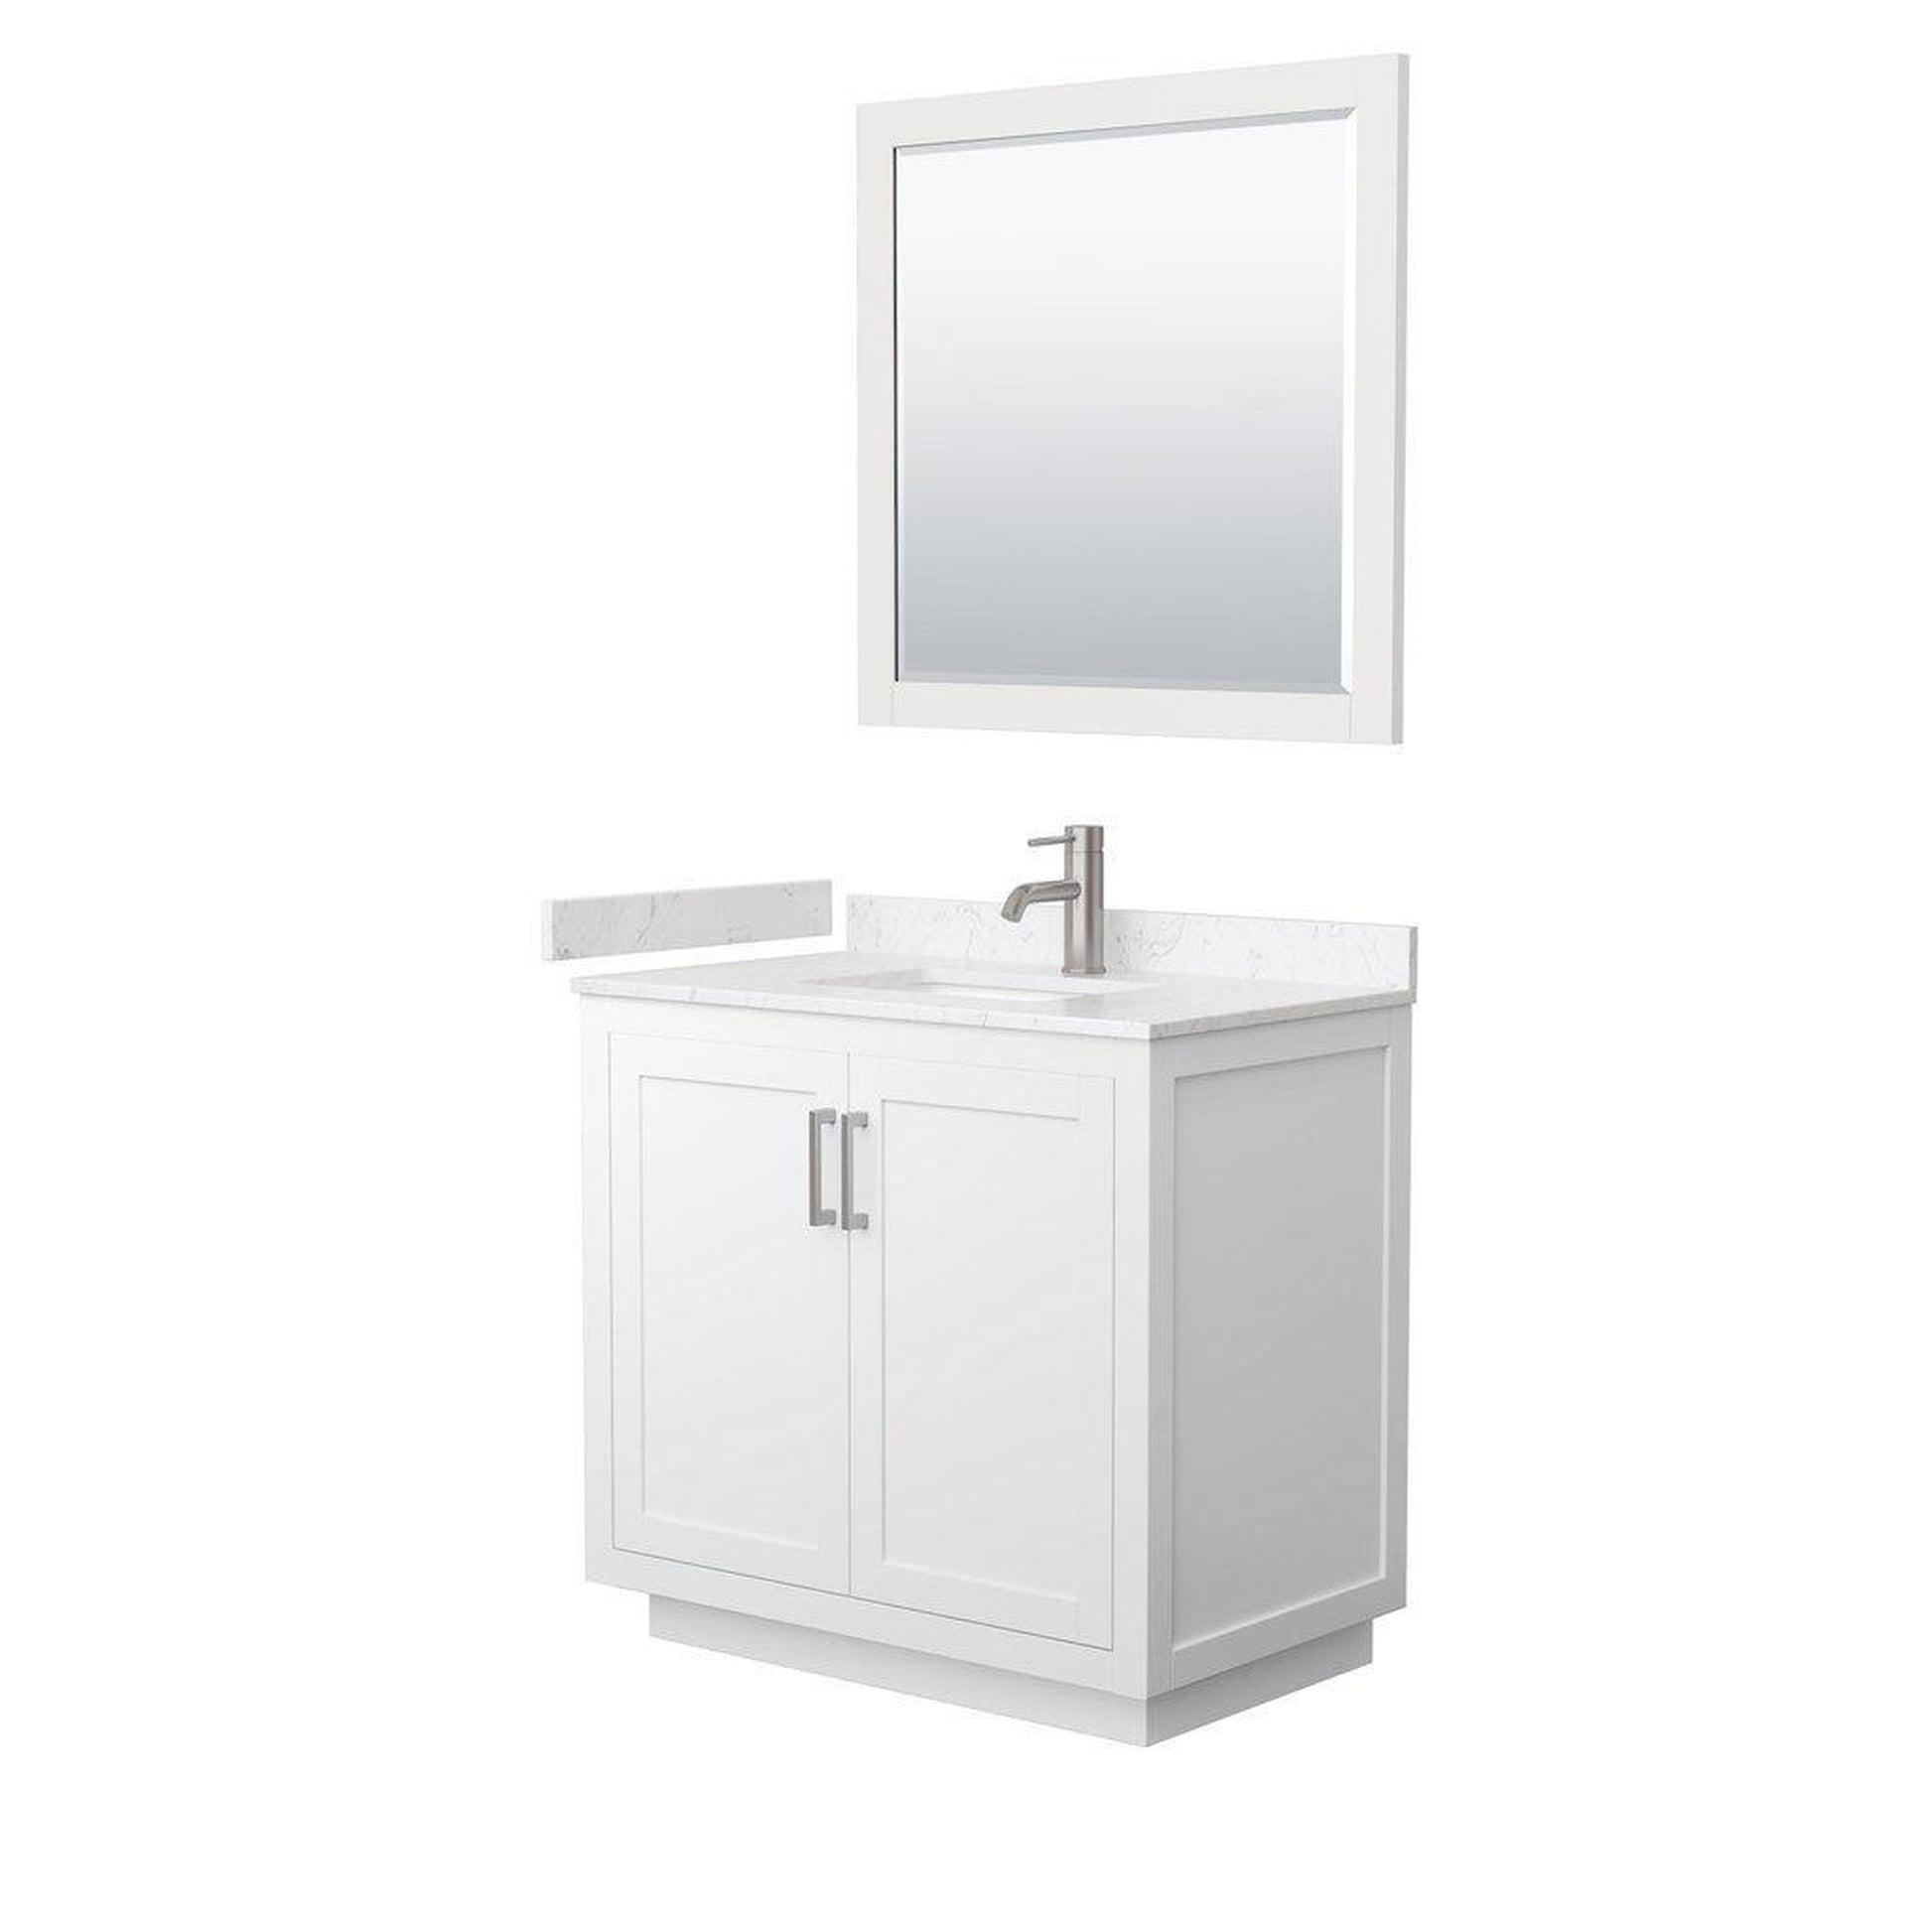 Wyndham Collection Miranda 36" Single Bathroom White Vanity Set With Light-Vein Carrara Cultured Marble Countertop, Undermount Square Sink, 34" Mirror And Brushed Nickel Trim